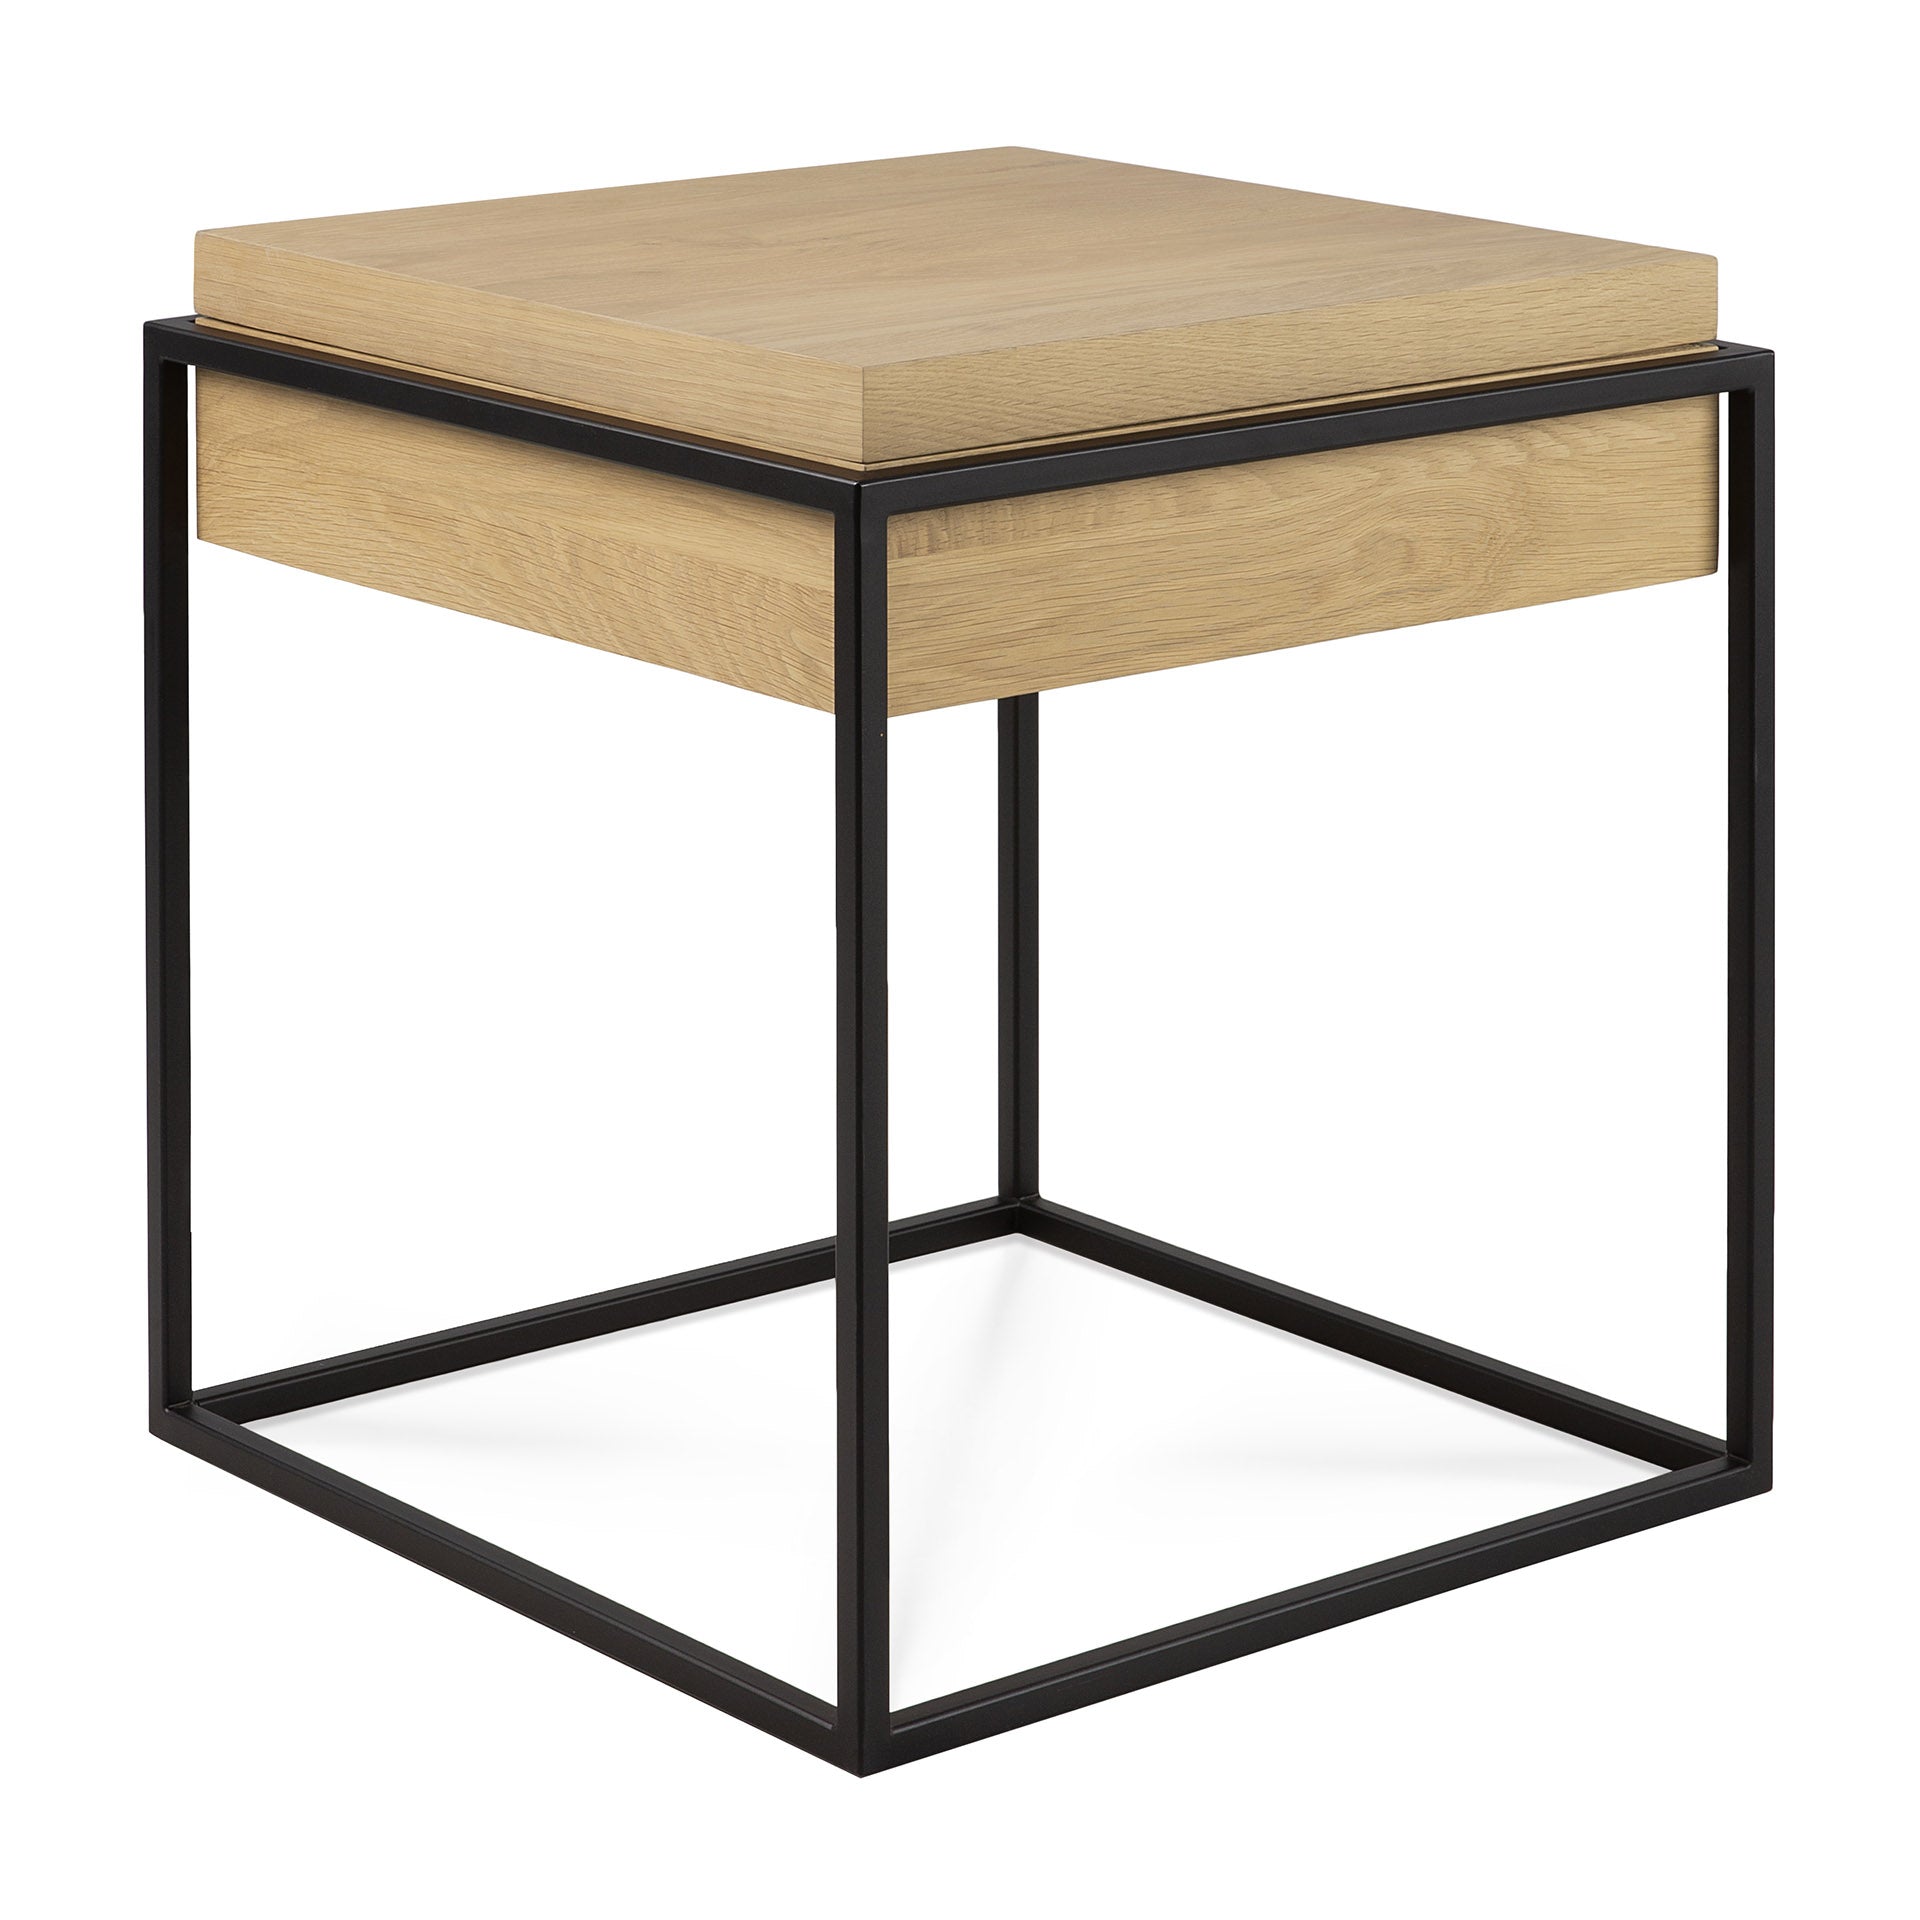 Monolit Side Table with Removable Cover